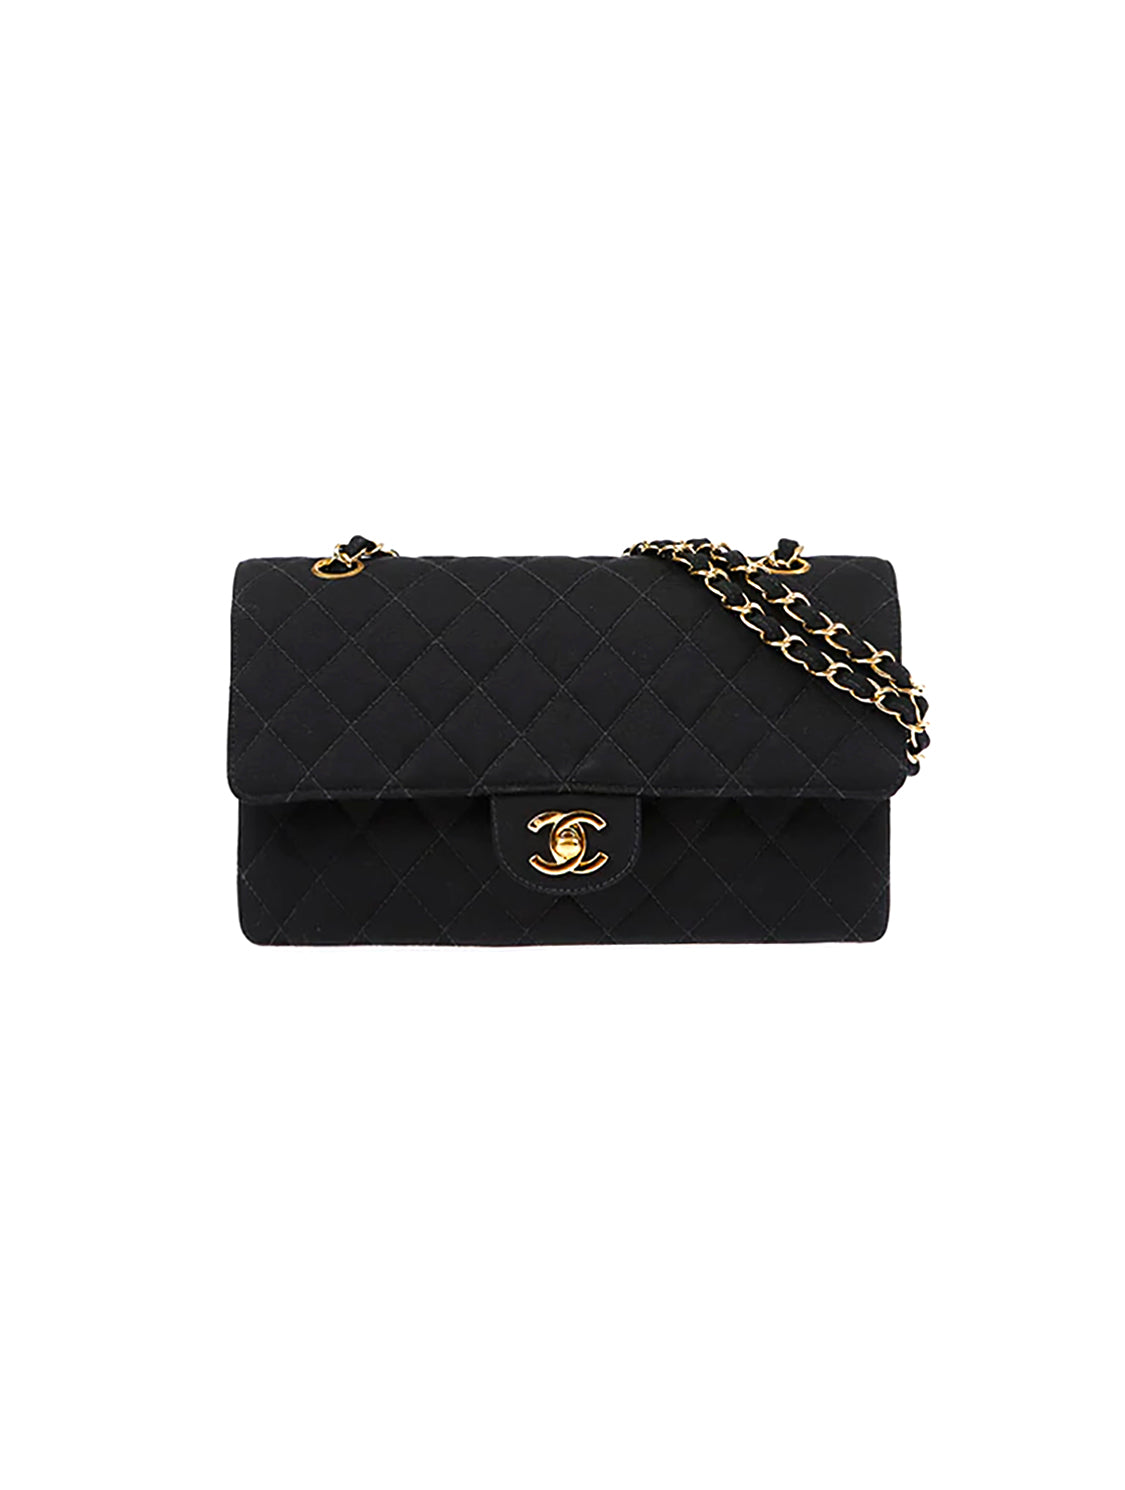 Chanel 2000s Black Cloth Leather Flap Bag · INTO